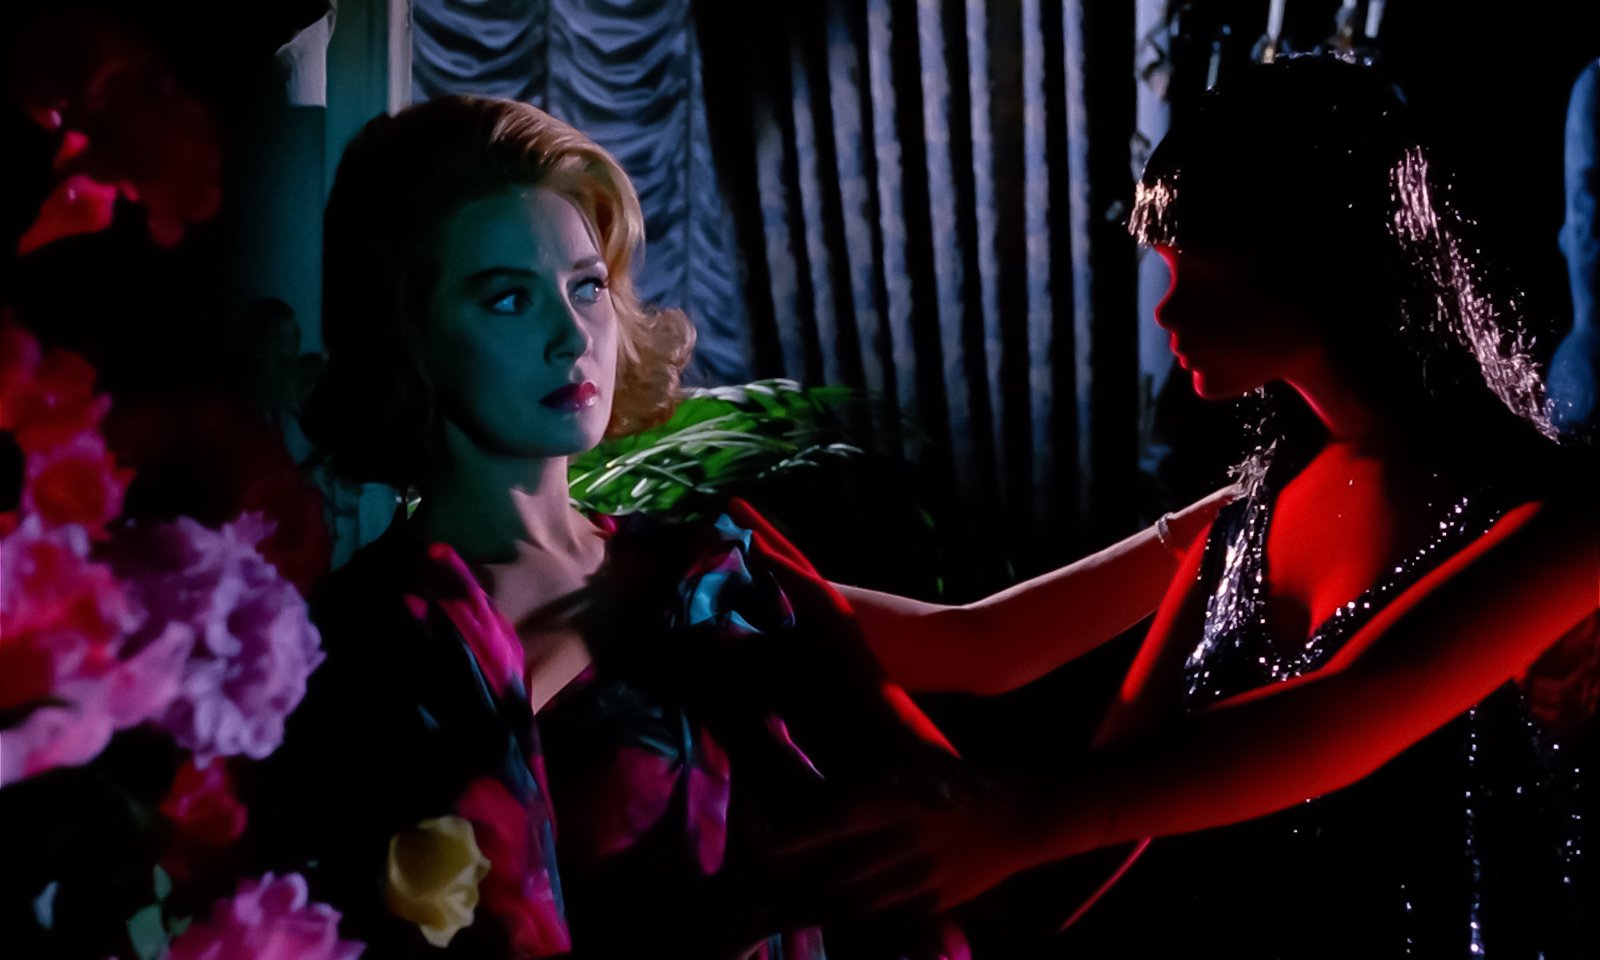 Mary Arden - Blood And Lace - Mario Bava - 1964